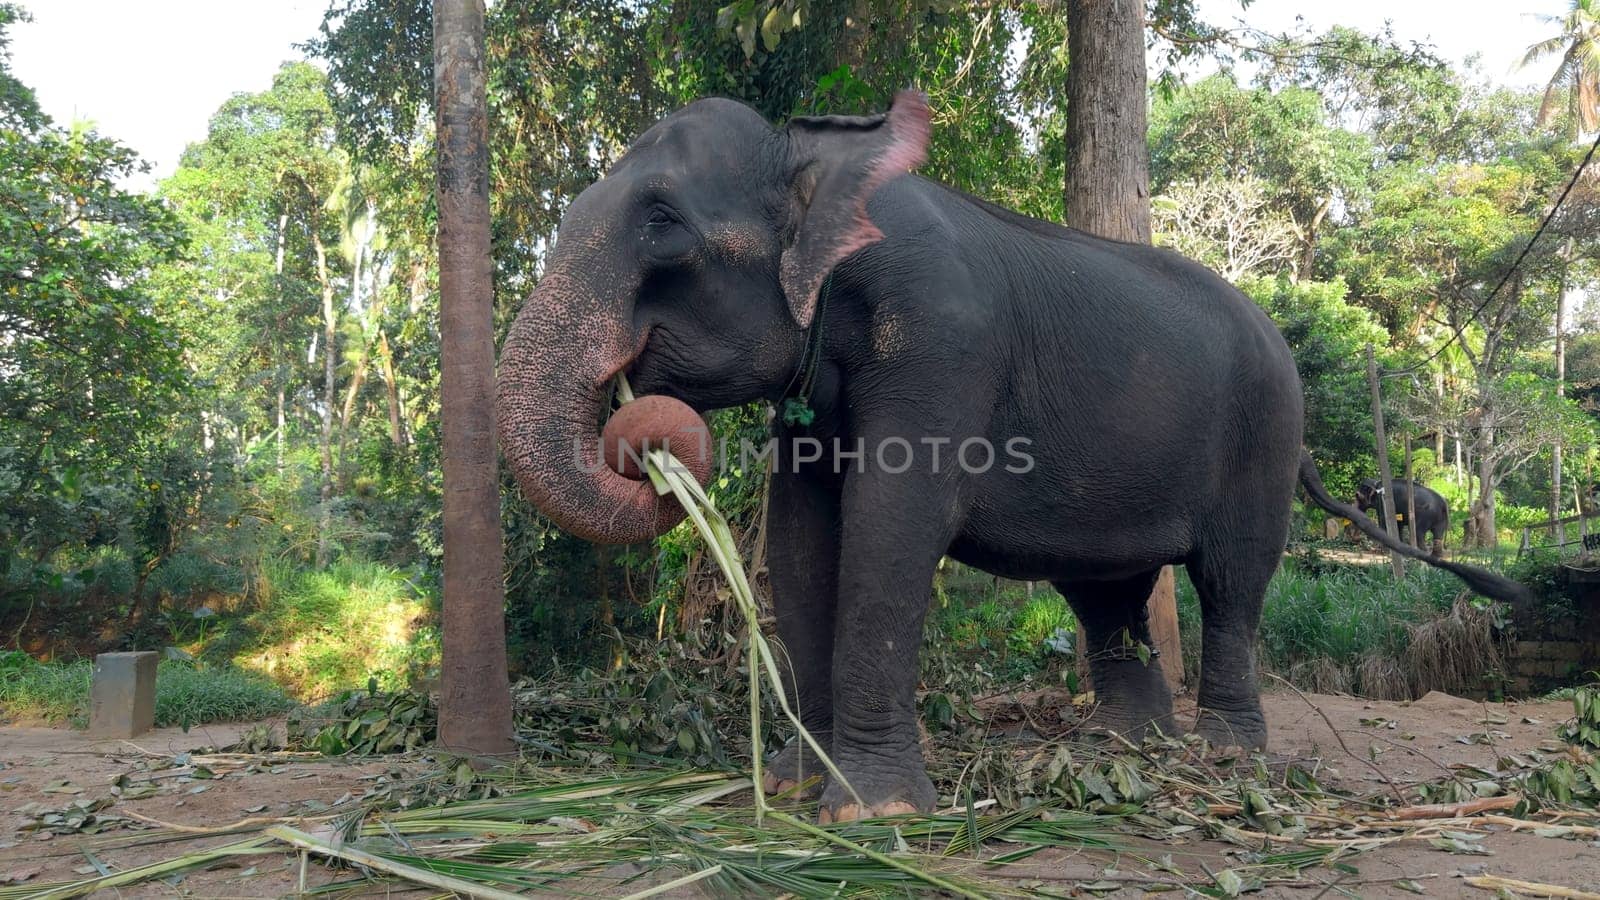 Elephant eats reeds in jungle. Action. Elephant farm for tourists in southern country. Elephants eat cane on farm by Mediawhalestock